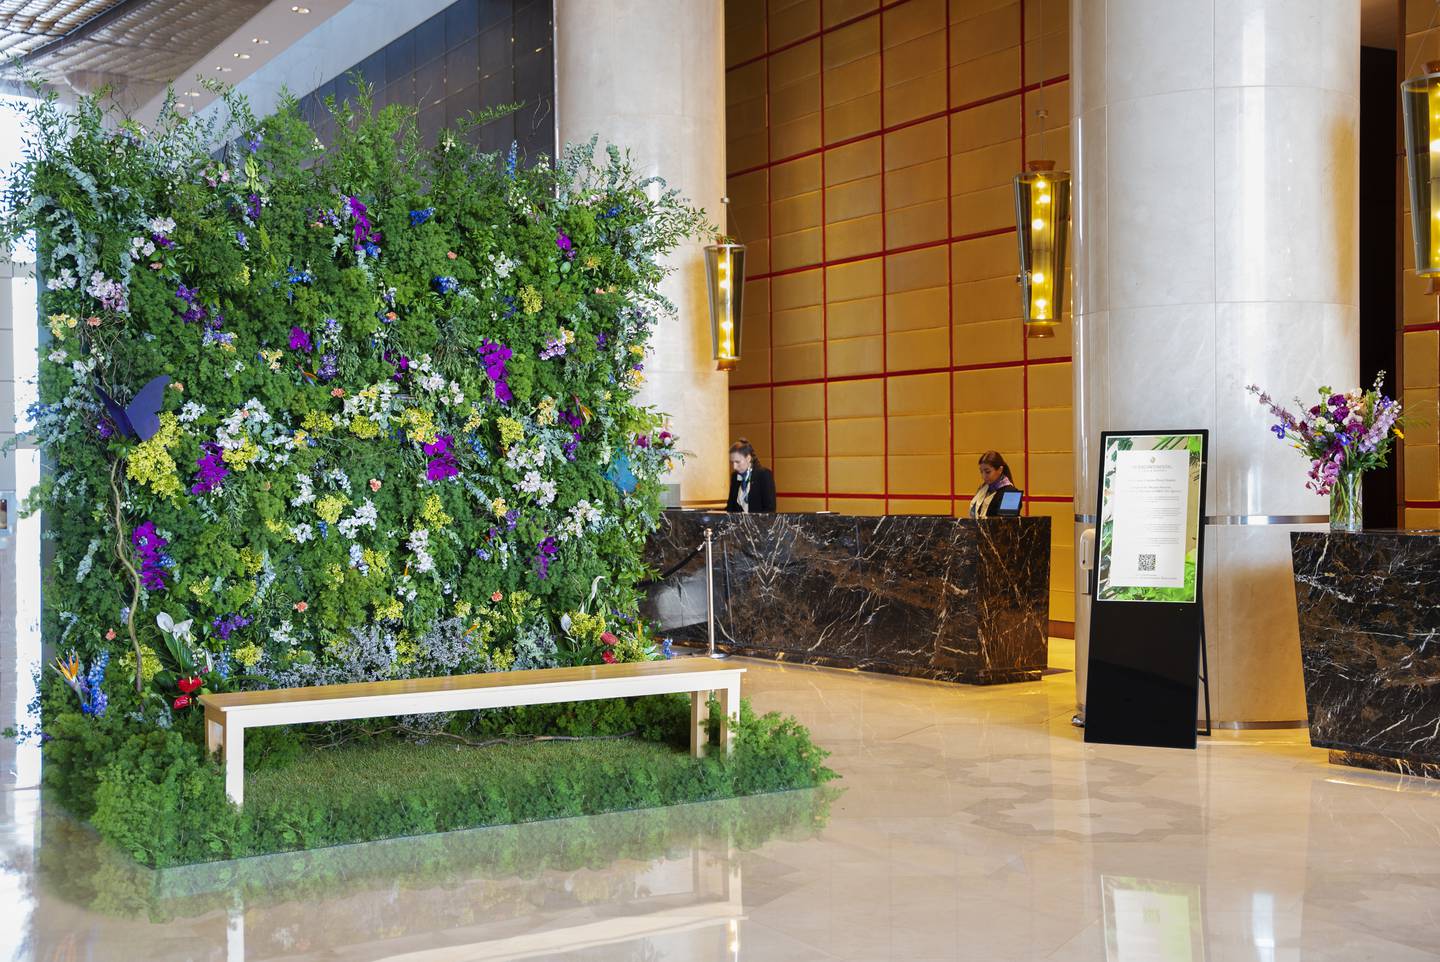 The hotel lobby has a 10-foot wall of floral beauty; the smell of fresh flowers makes for a wonderful entrance. Photo: InterContinental Dubai Festival City